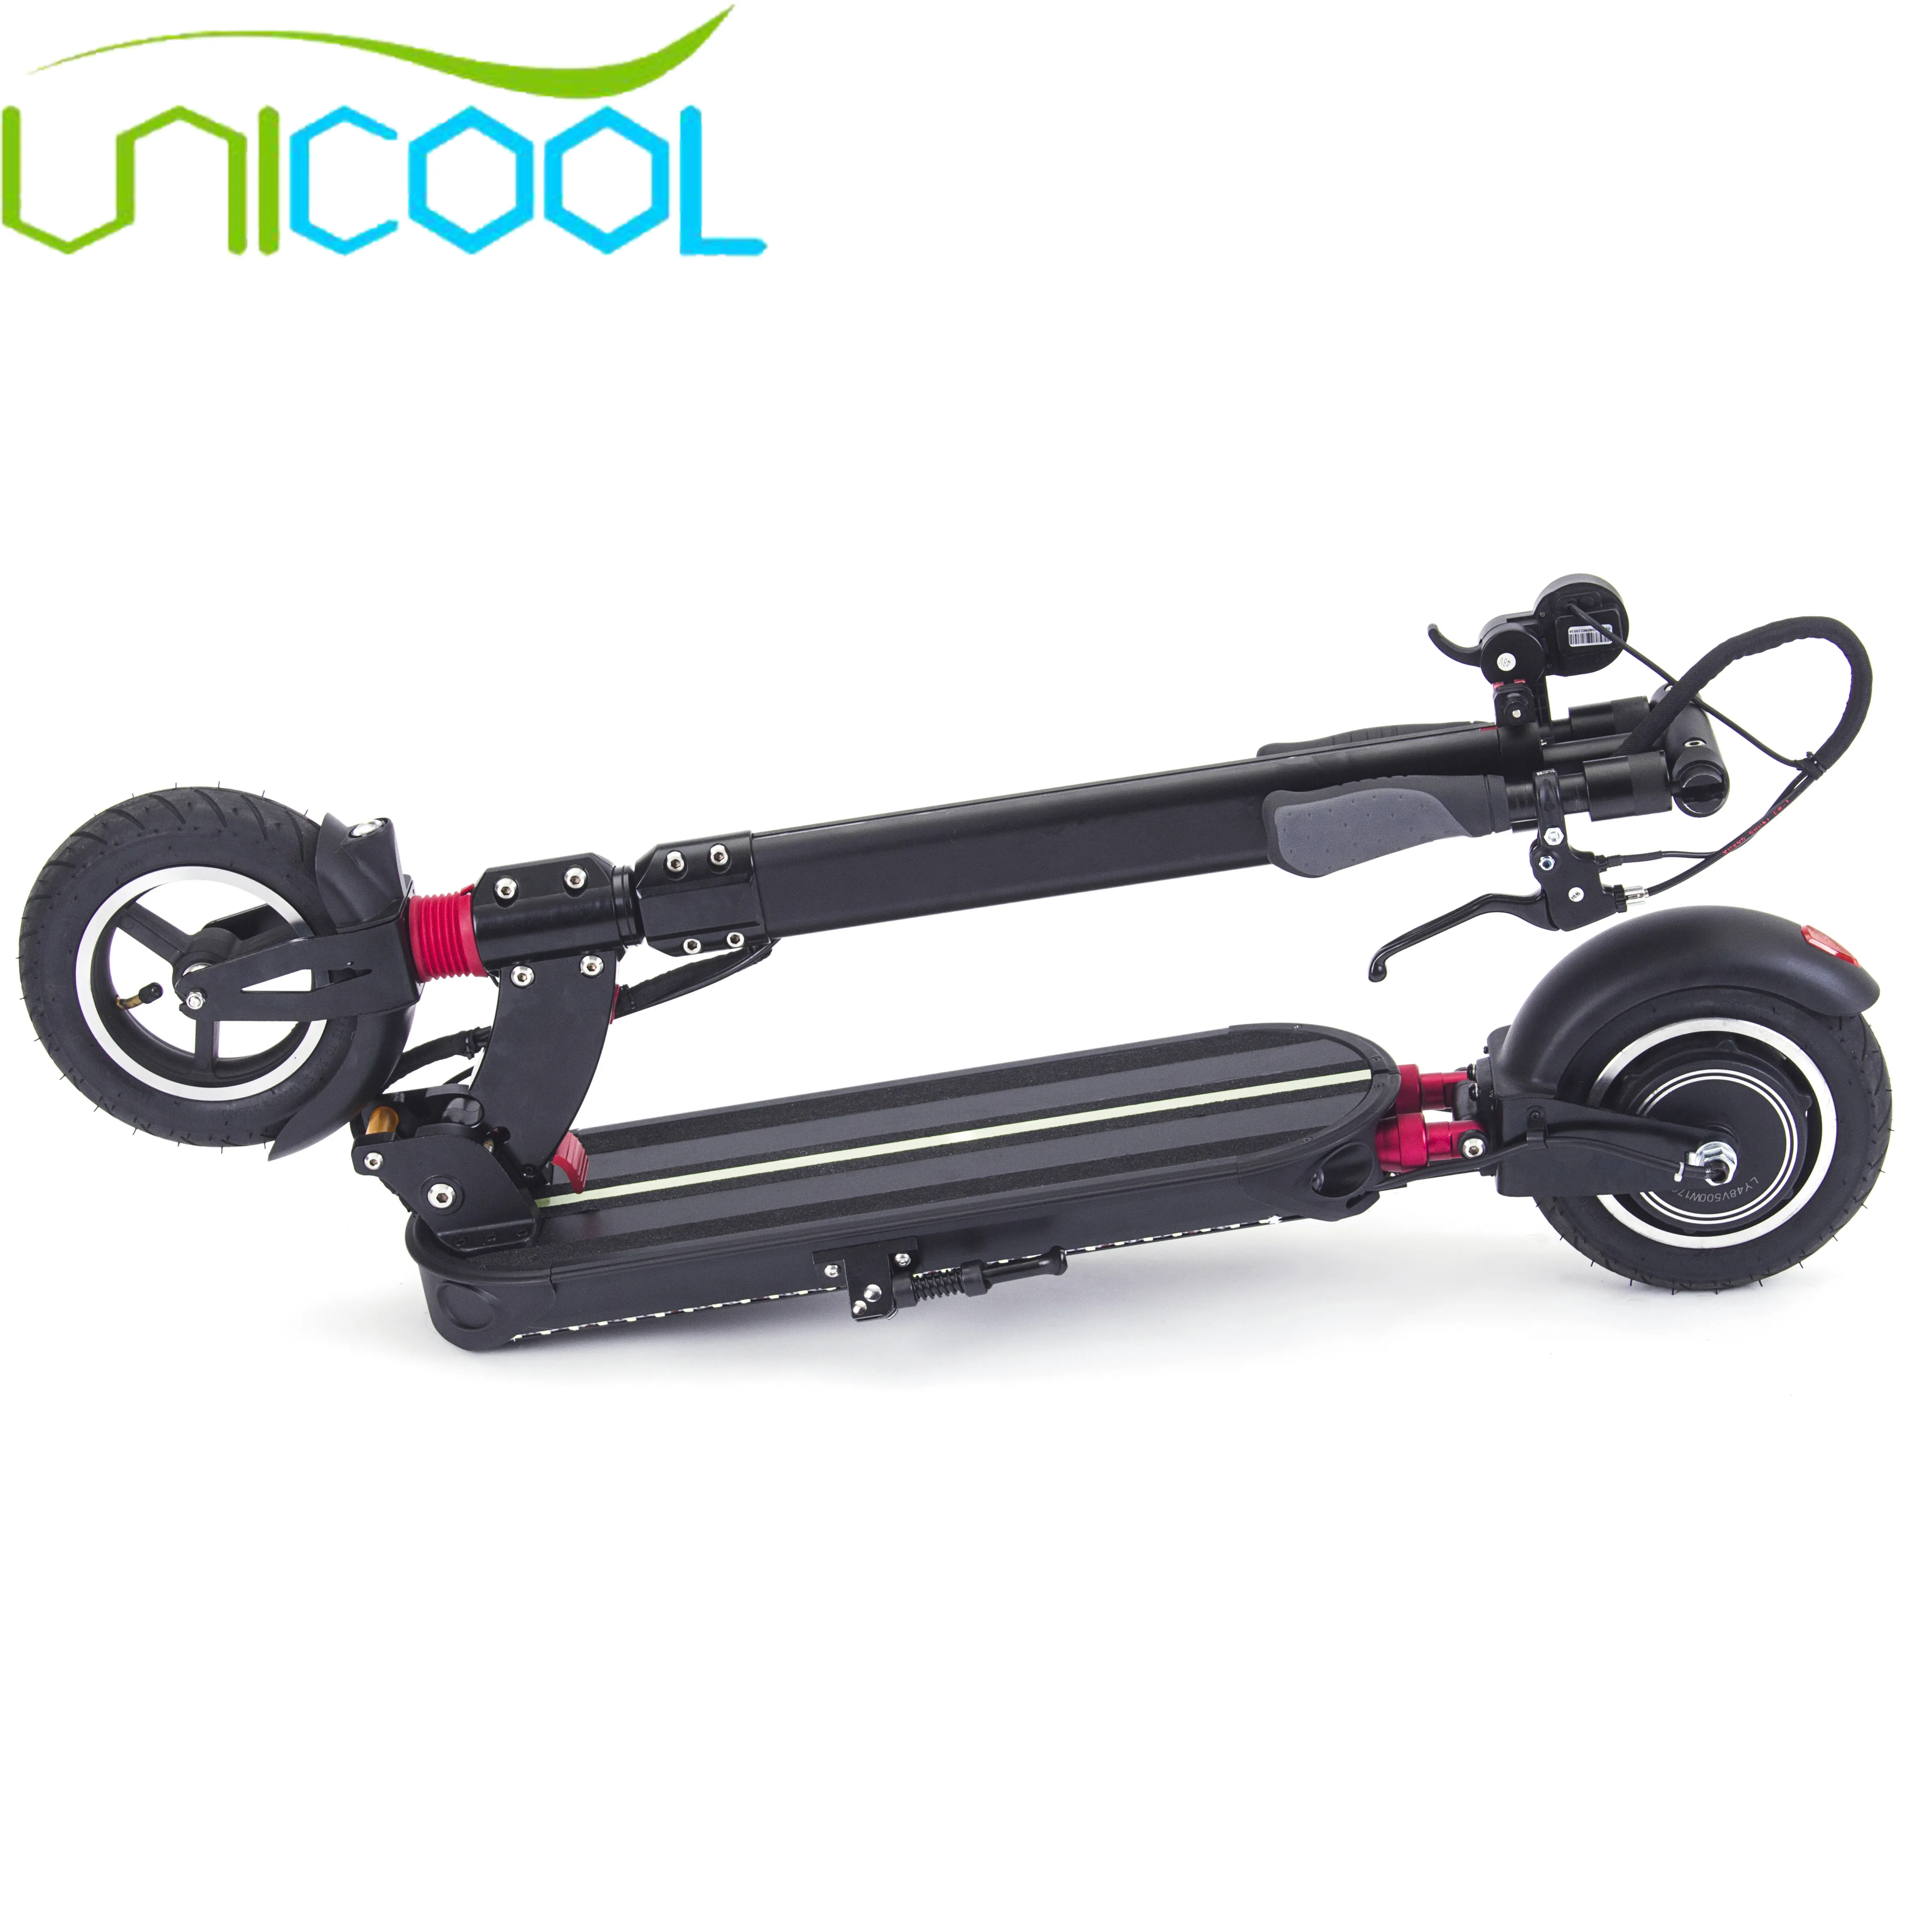 Top Brand 350w/500w Standing 2 Wheel Mini Electric Scooter Lml Scooter